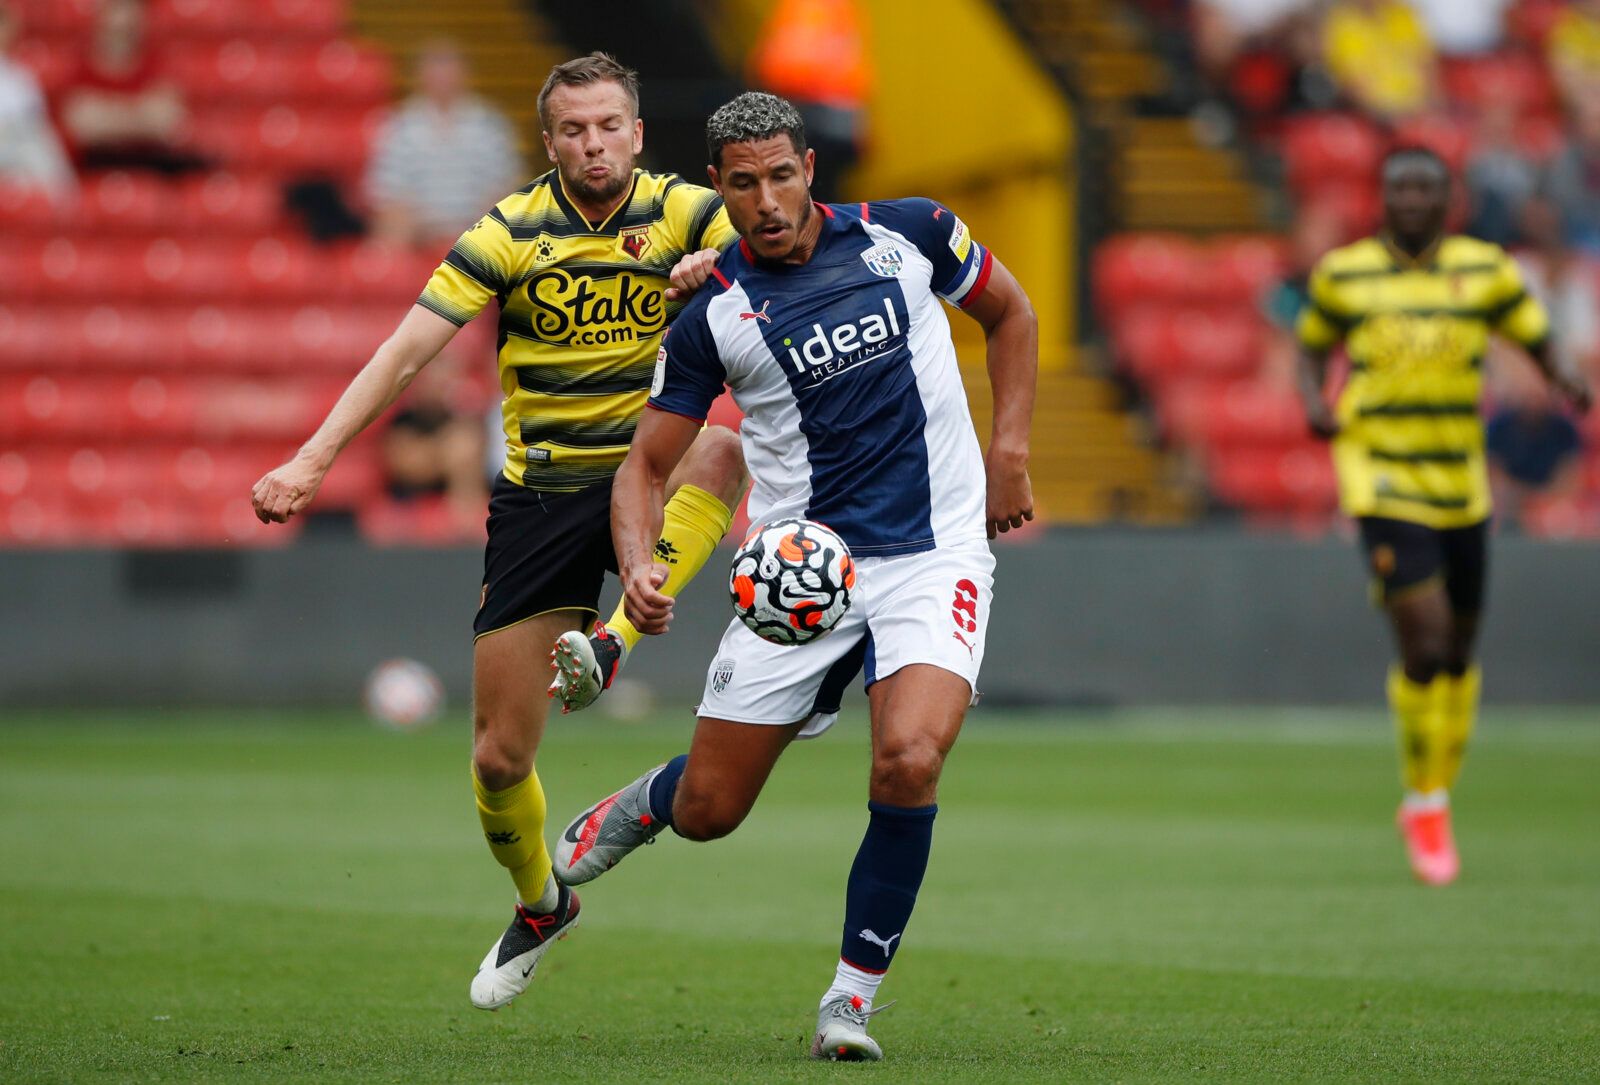 Soccer Football - Pre Season Friendly - Watford v West Bromwich Albion - Vicarage Road, Watford, Britain - July 24, 2021 Watford's Tom Cleverley in action with West Bromwich Albion's Jake Livermore Action Images via Reuters/Paul Childs